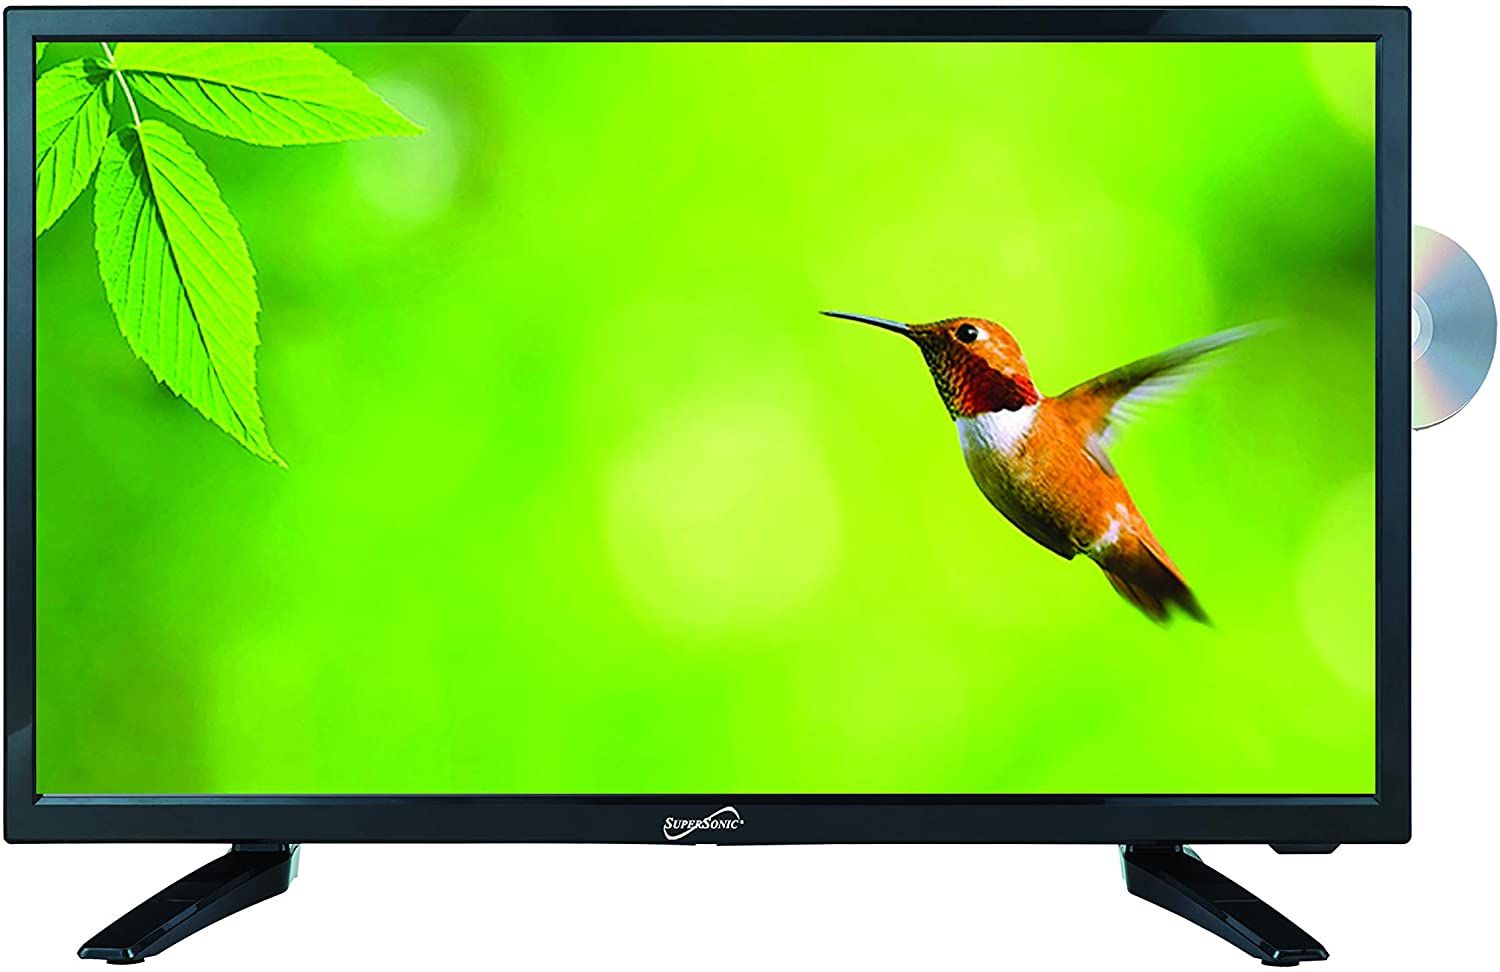 SuperSonic SC-1912 LED Widescreen HDTV 1